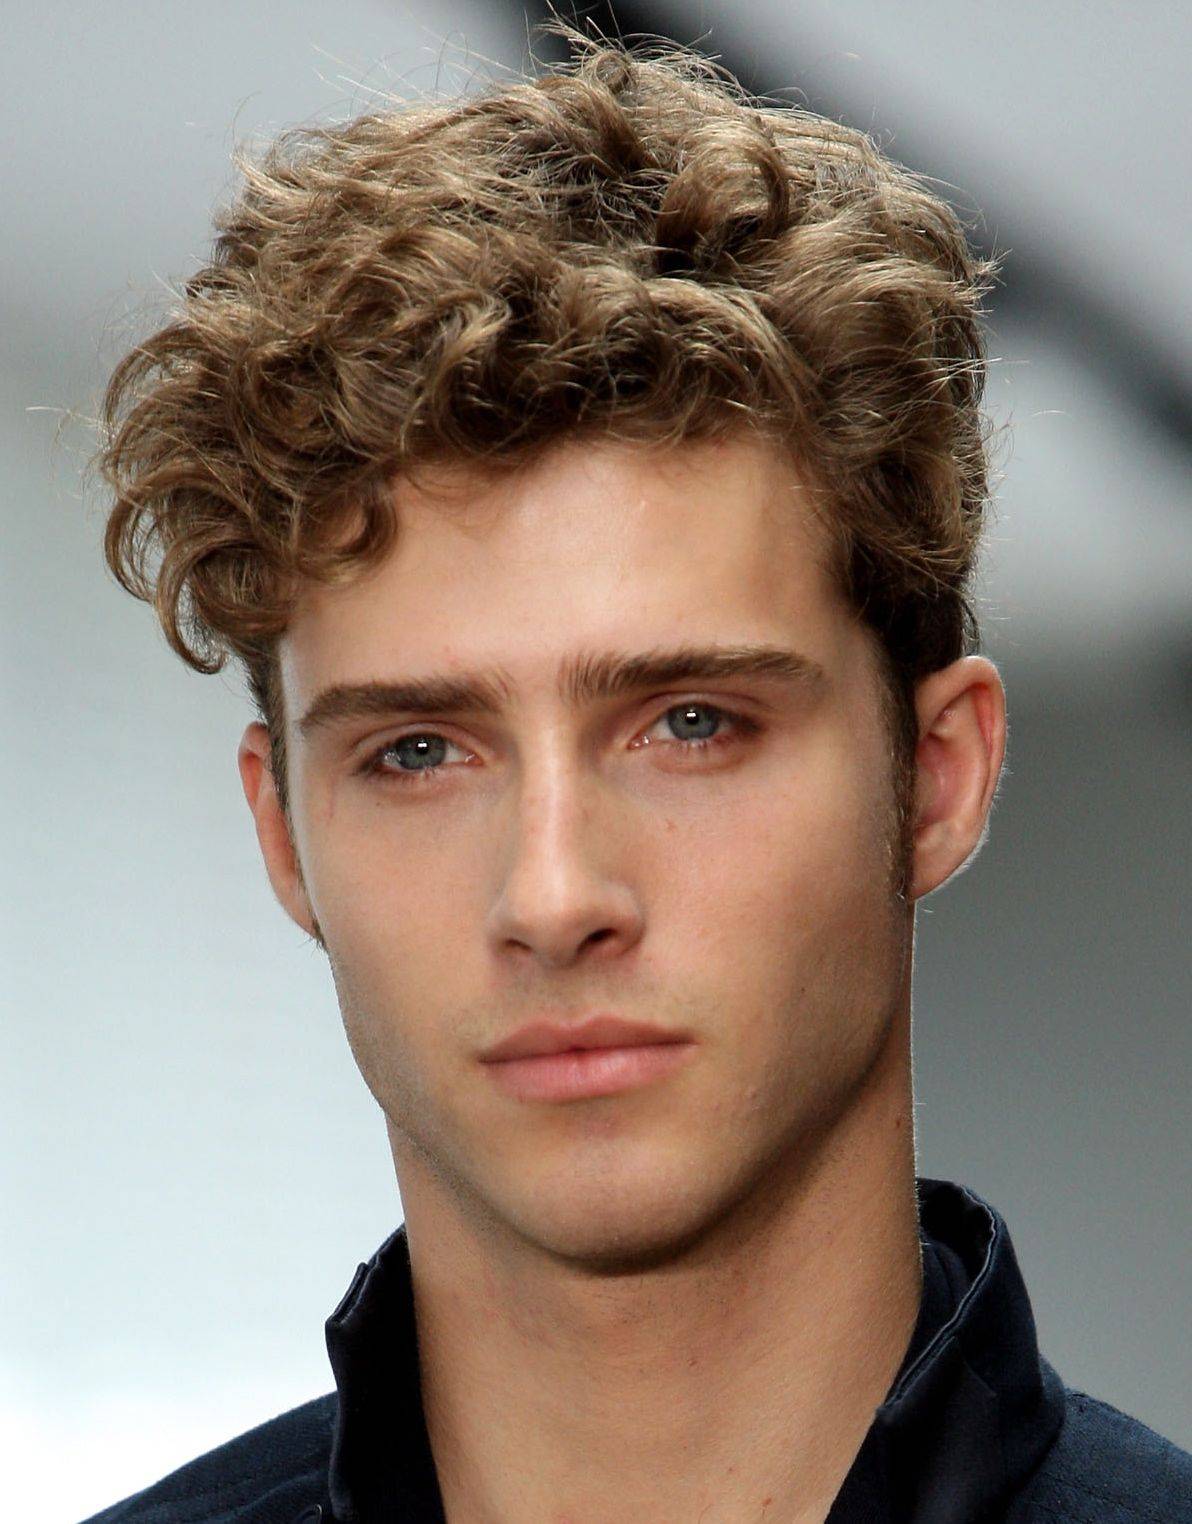 Hairstyles For Men With Curly Hair Elle Hairstyle